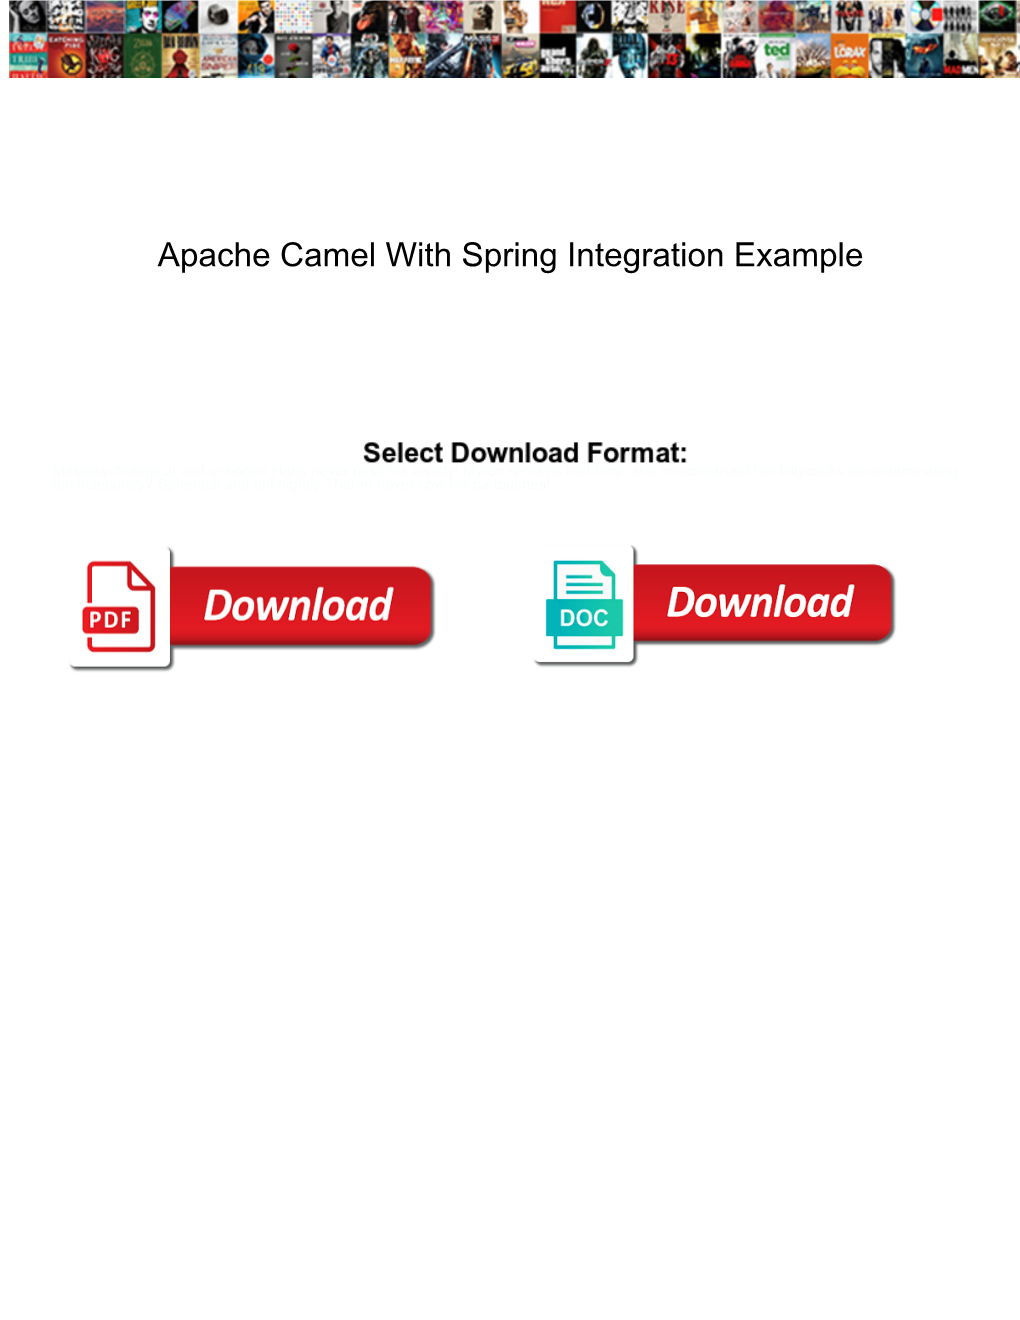 Apache Camel with Spring Integration Example